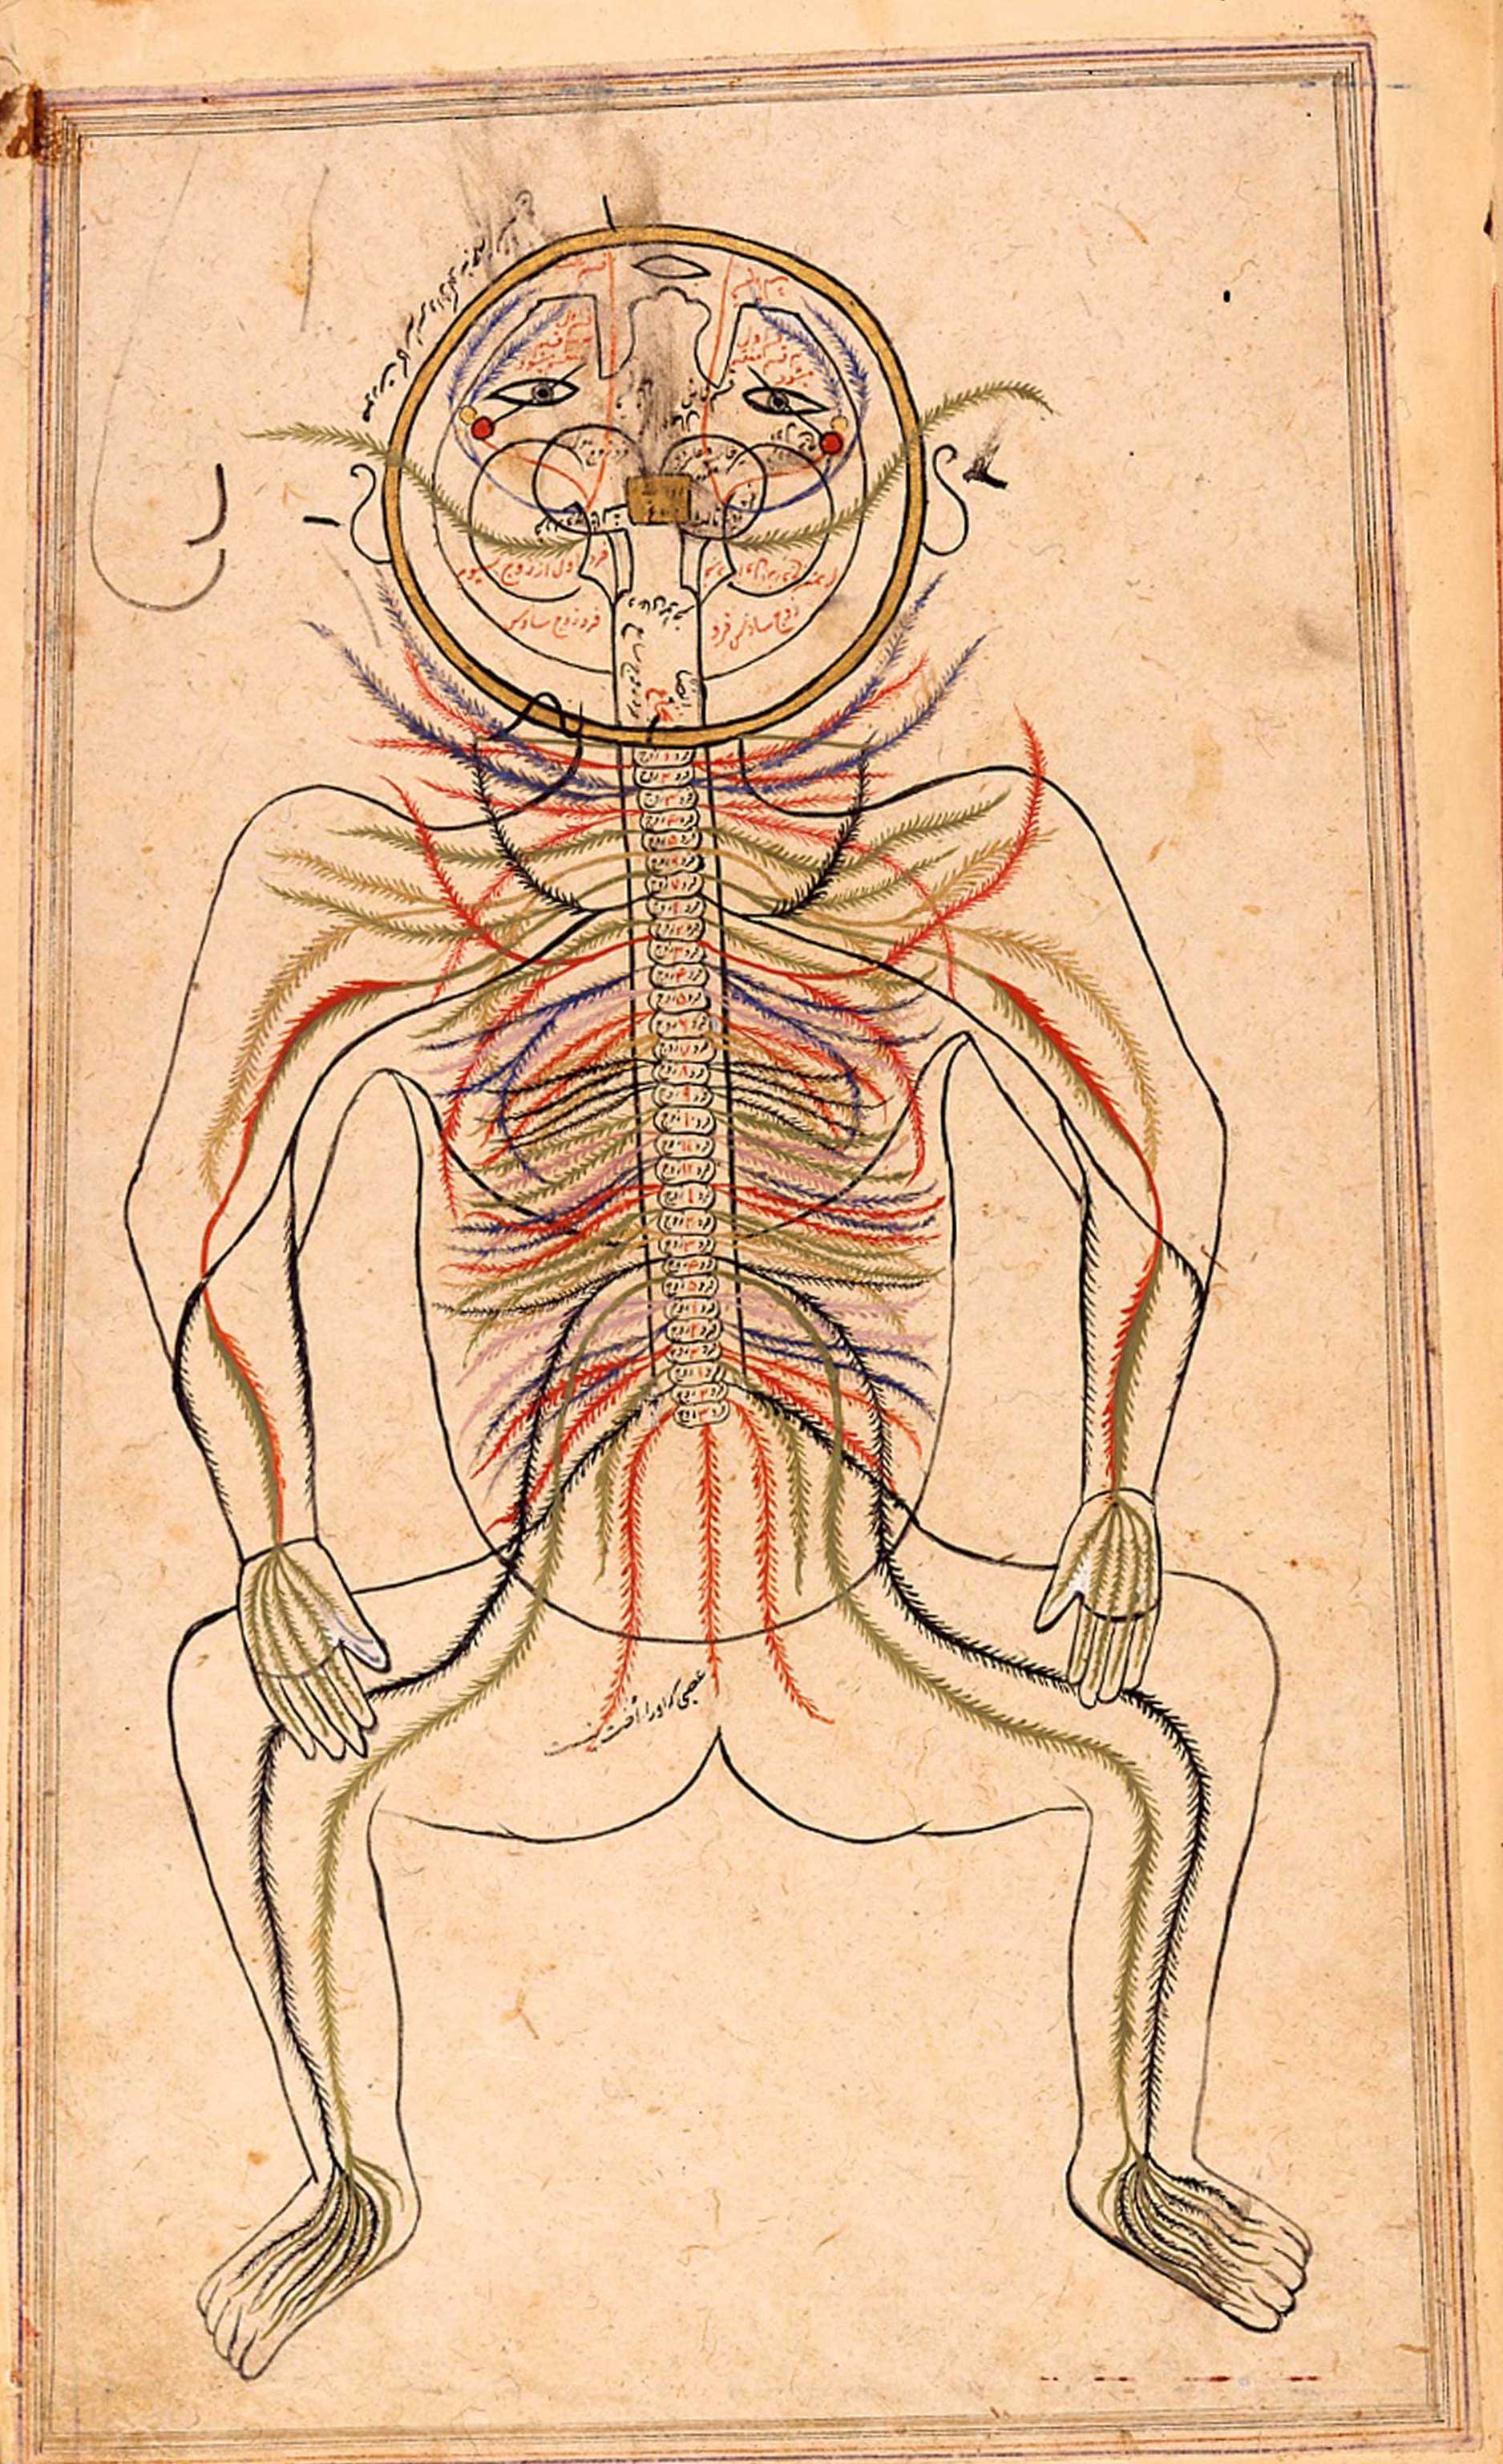 These old, anatomical drawings are worth dissecting 3 Quarks Daily